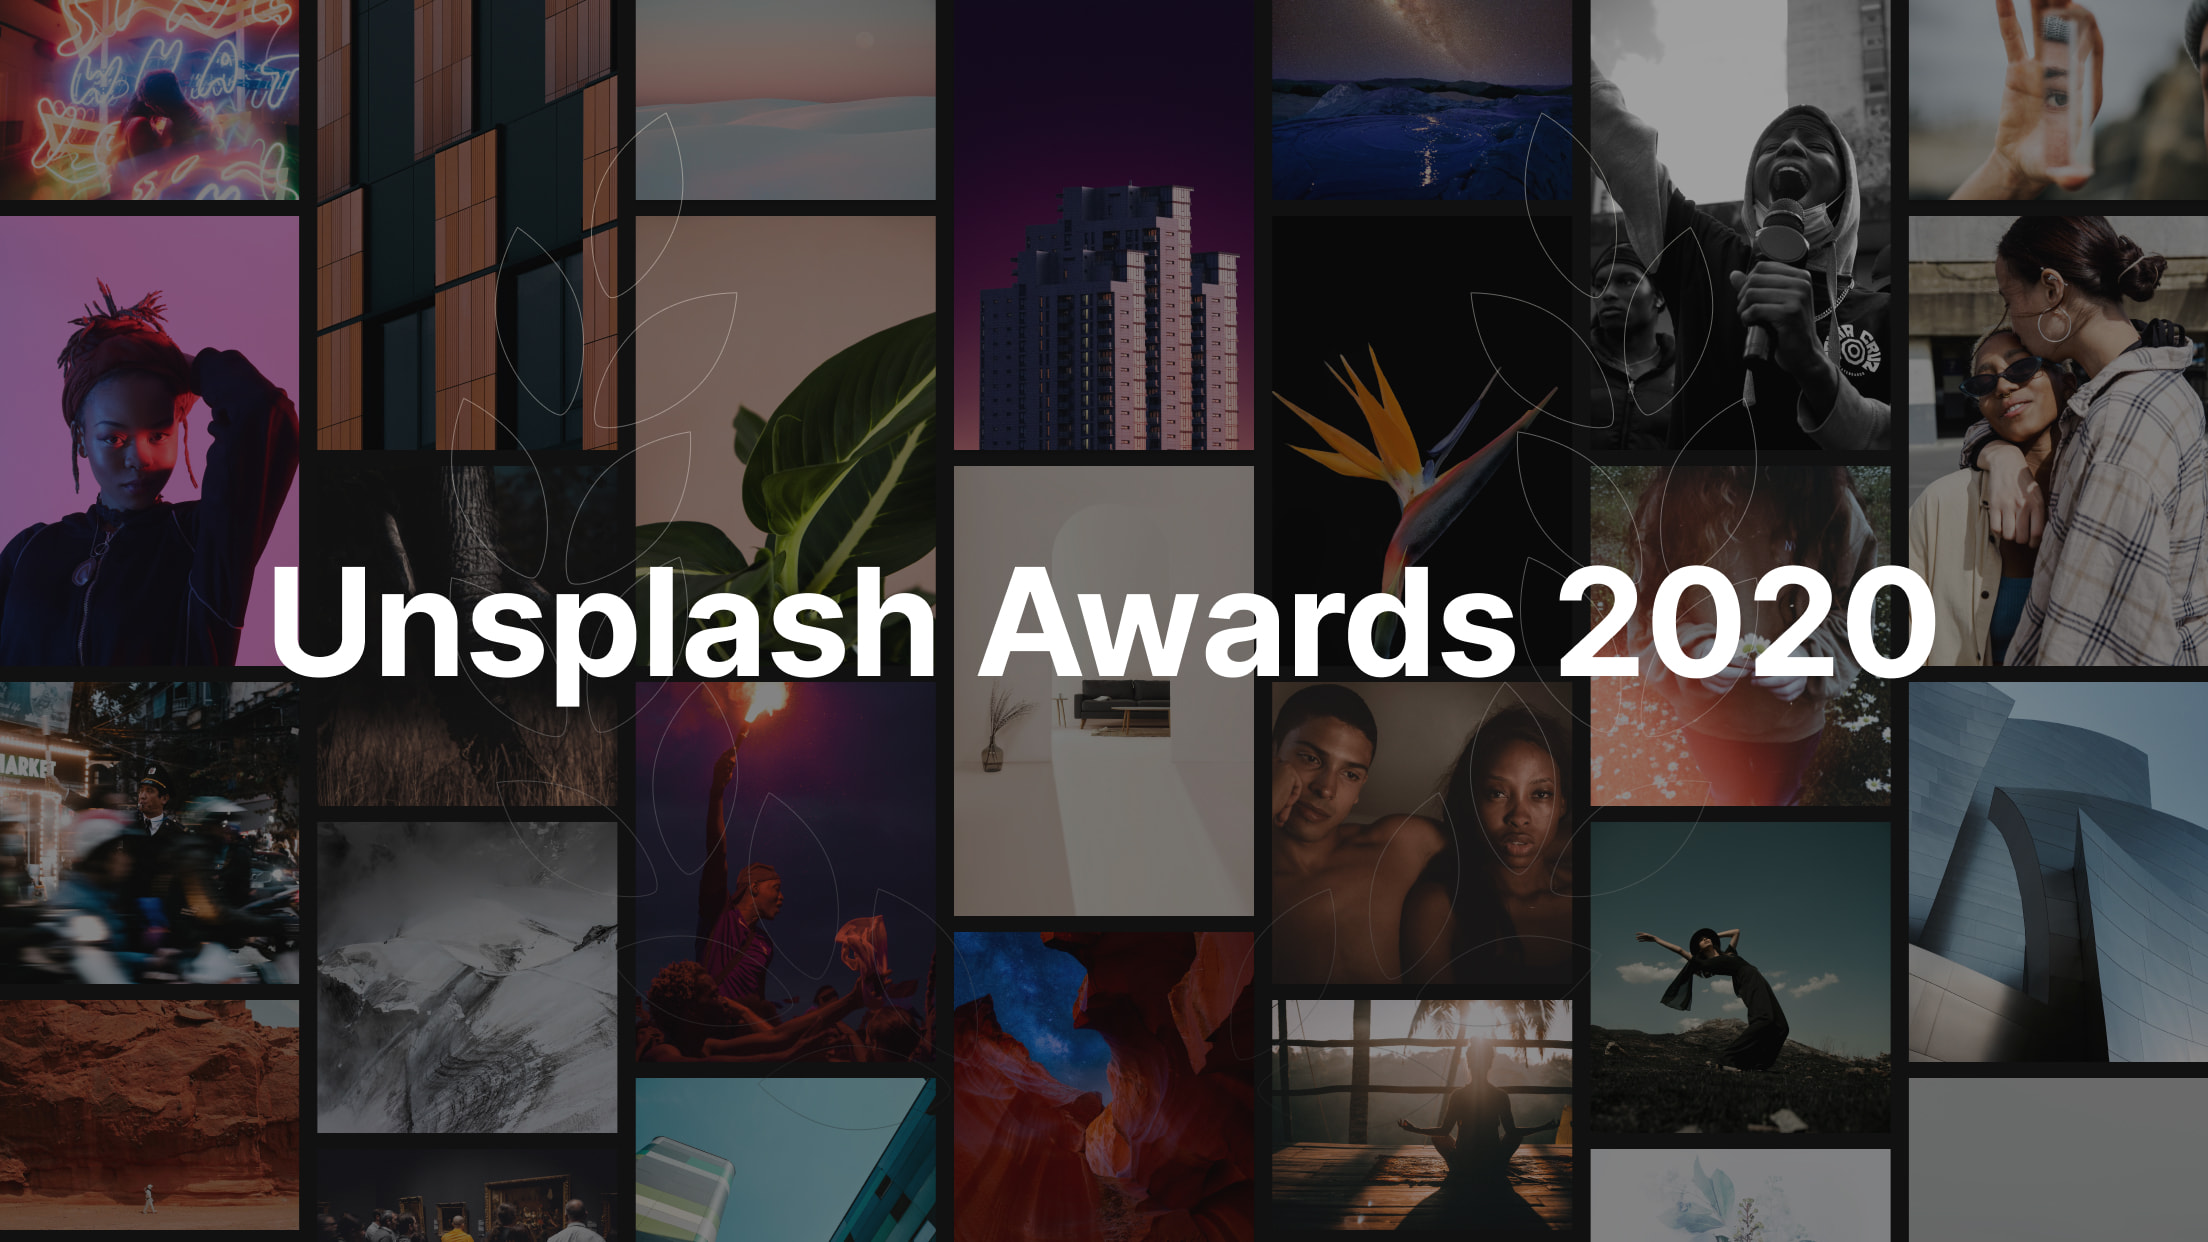 The fourth edition of Unsplash Awards is here!